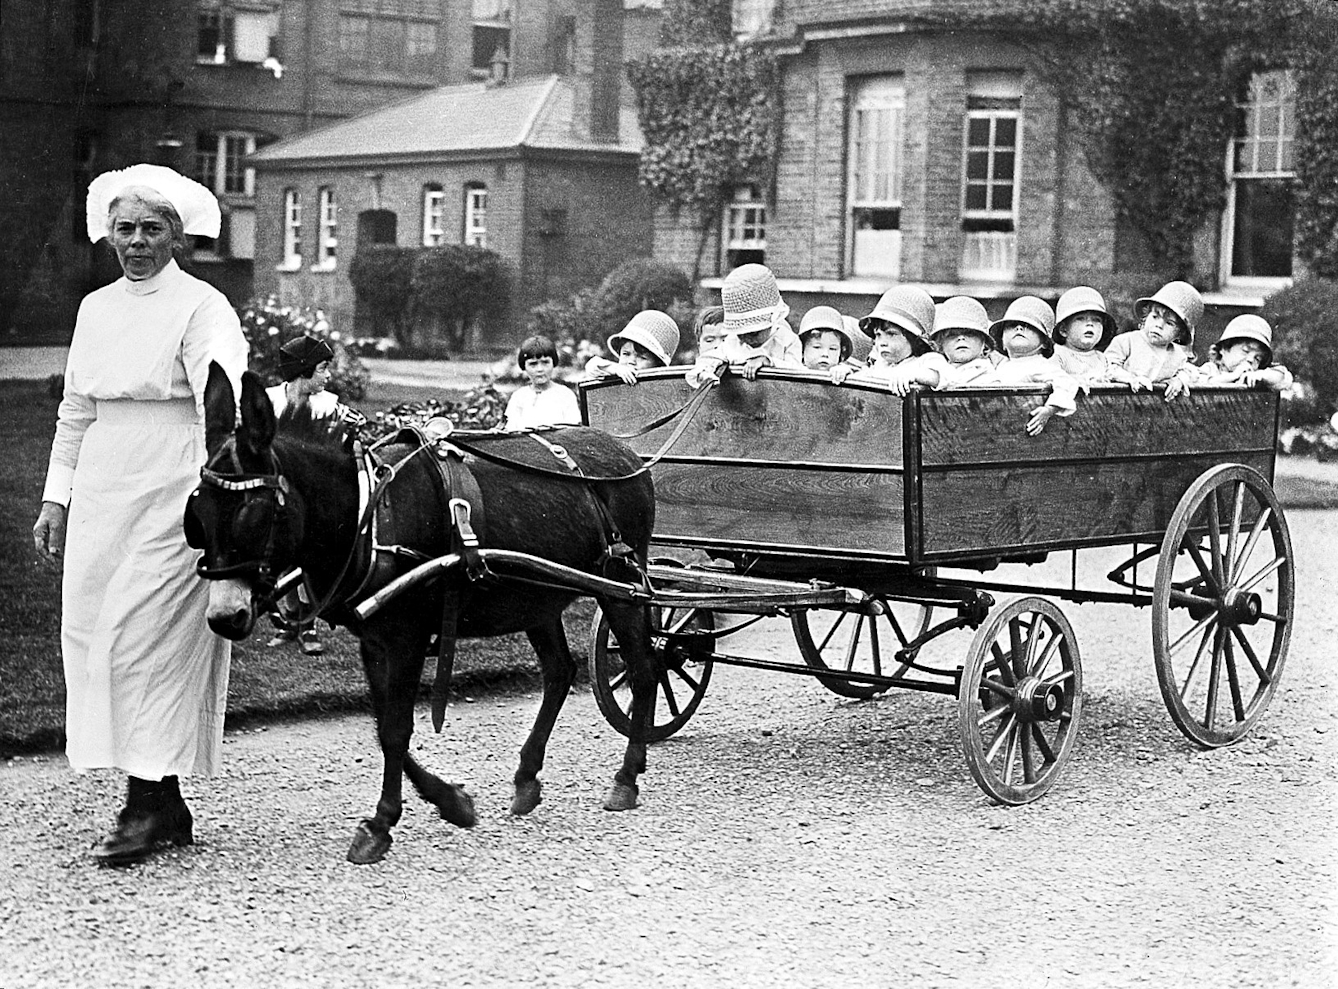 Black and white photograph showing a dark brown donkey pulling a wooden cart with several young children in it (all wearing hats). the donkey and cart is being led by a female nurse wearing a white, ankle-length apron.